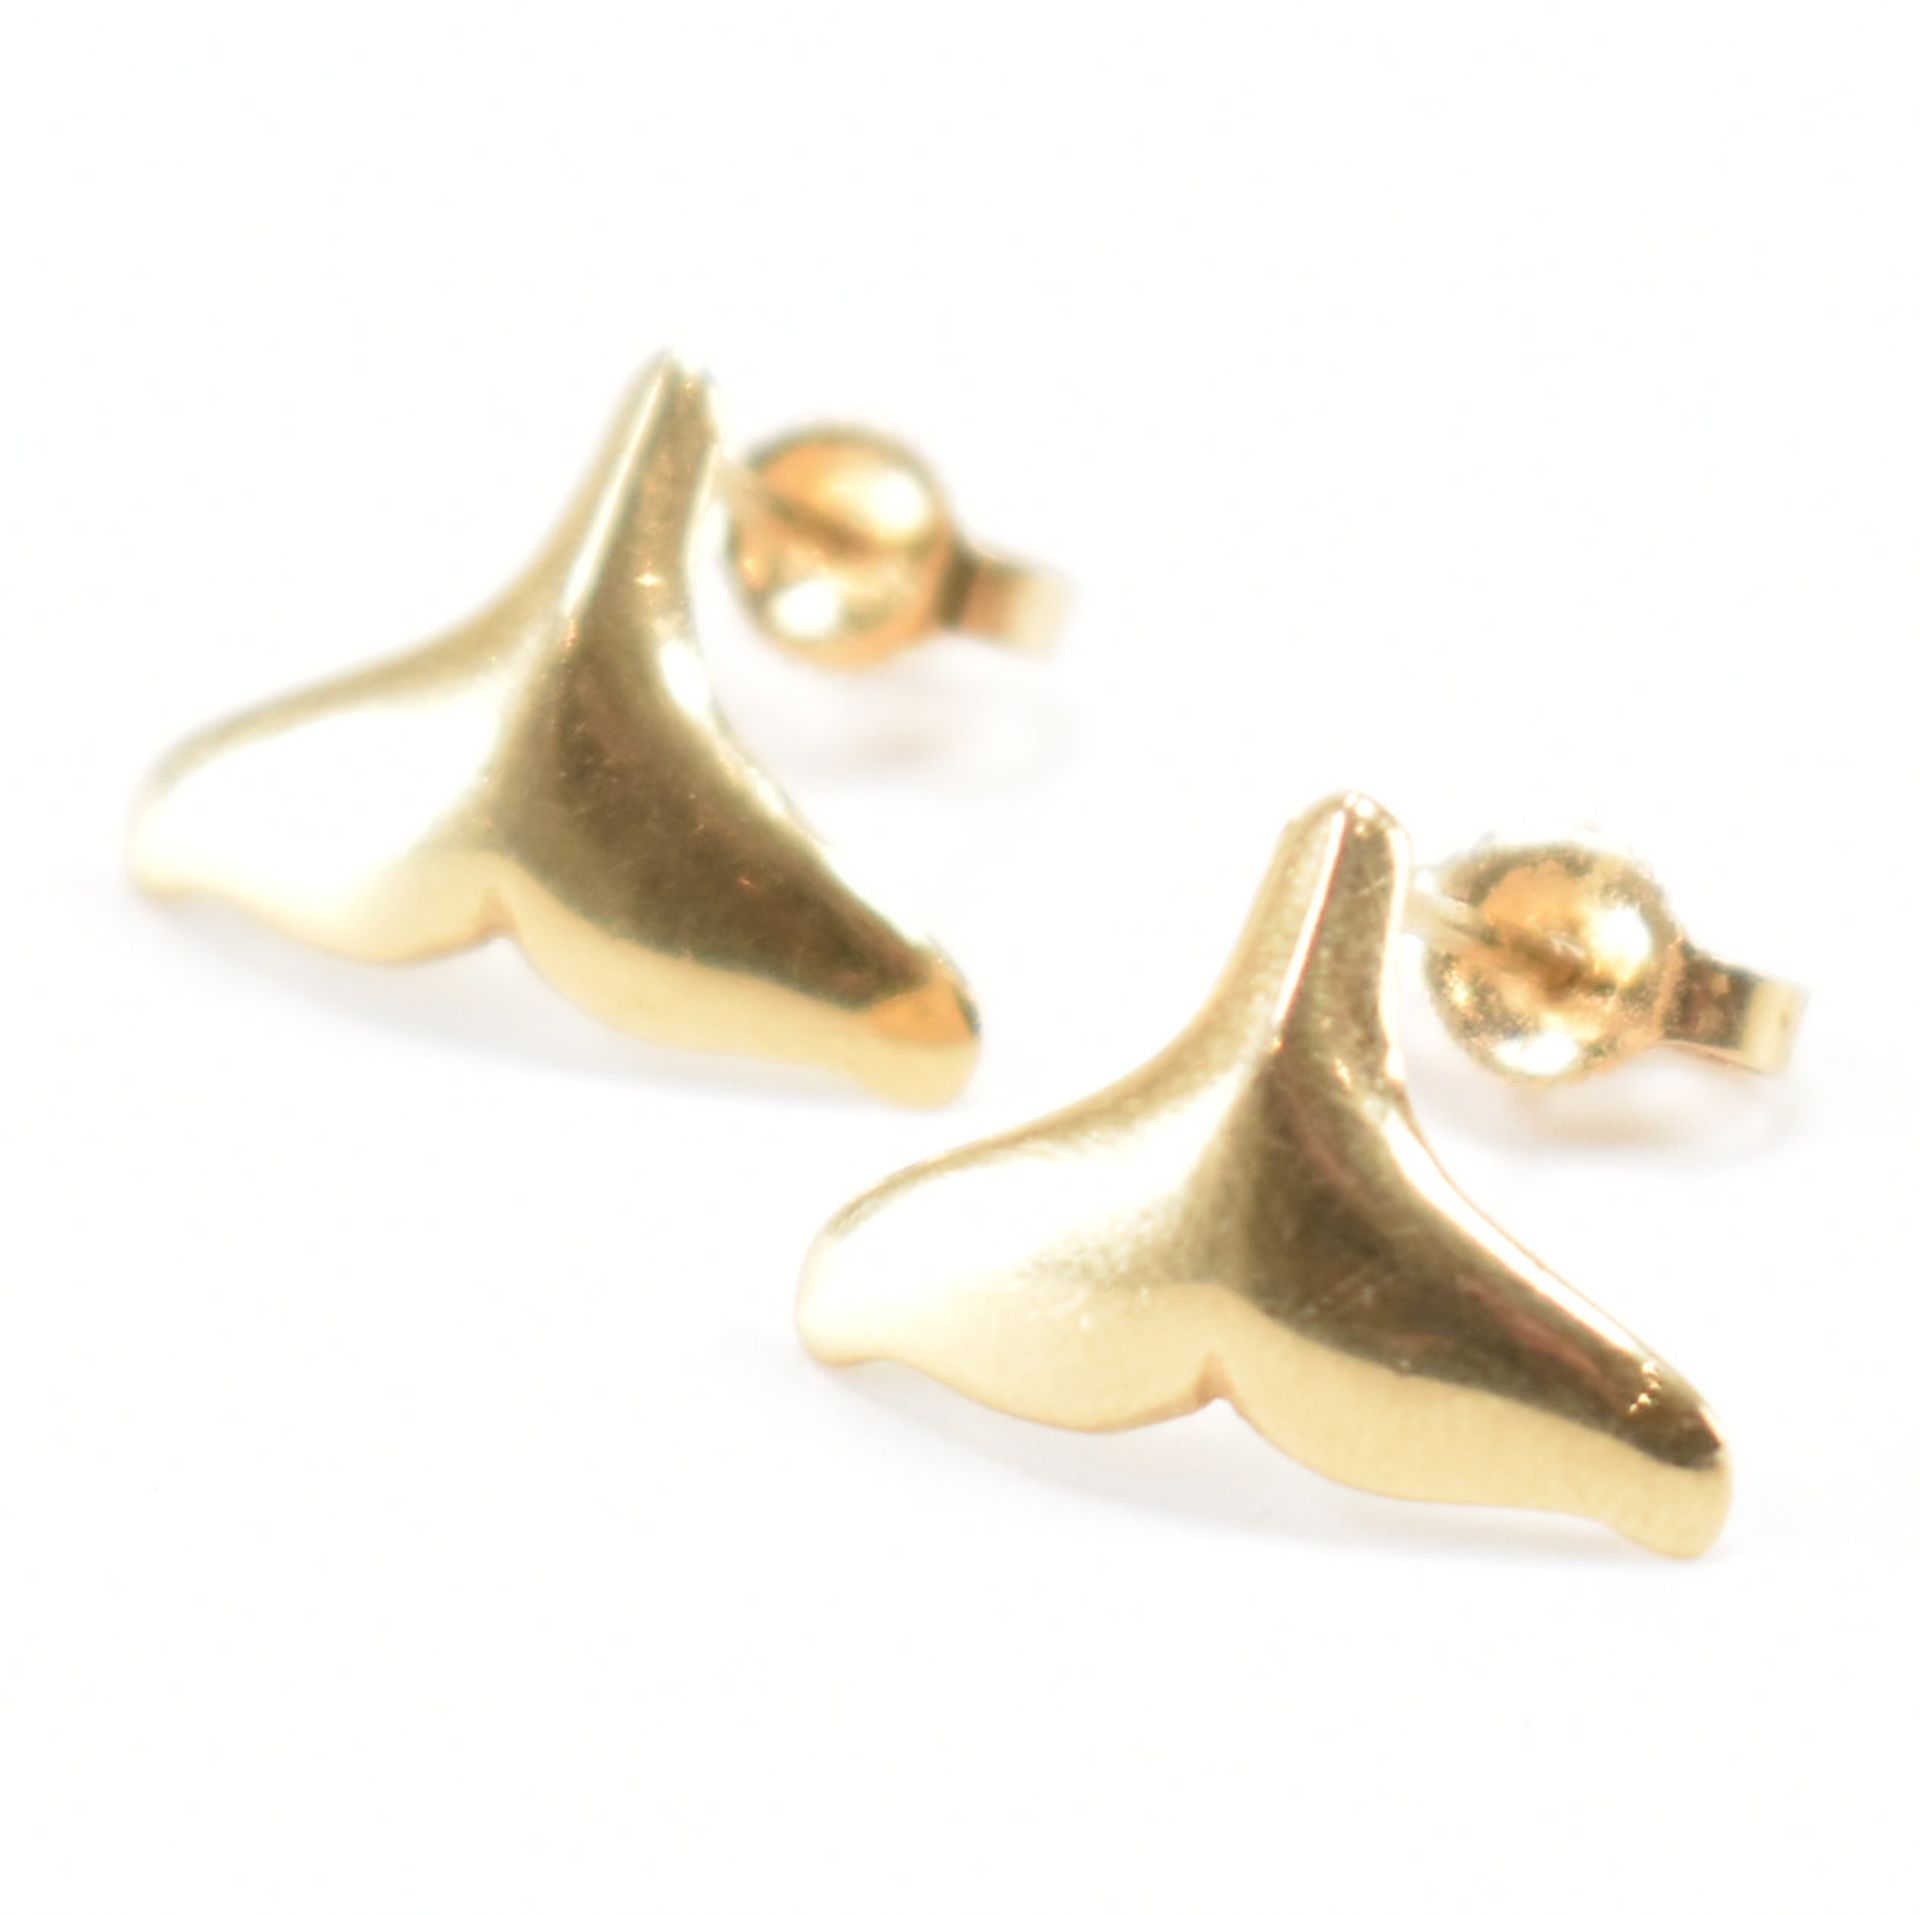 PAIR OF GOLD WHALE TAIL STUD EARRINGS